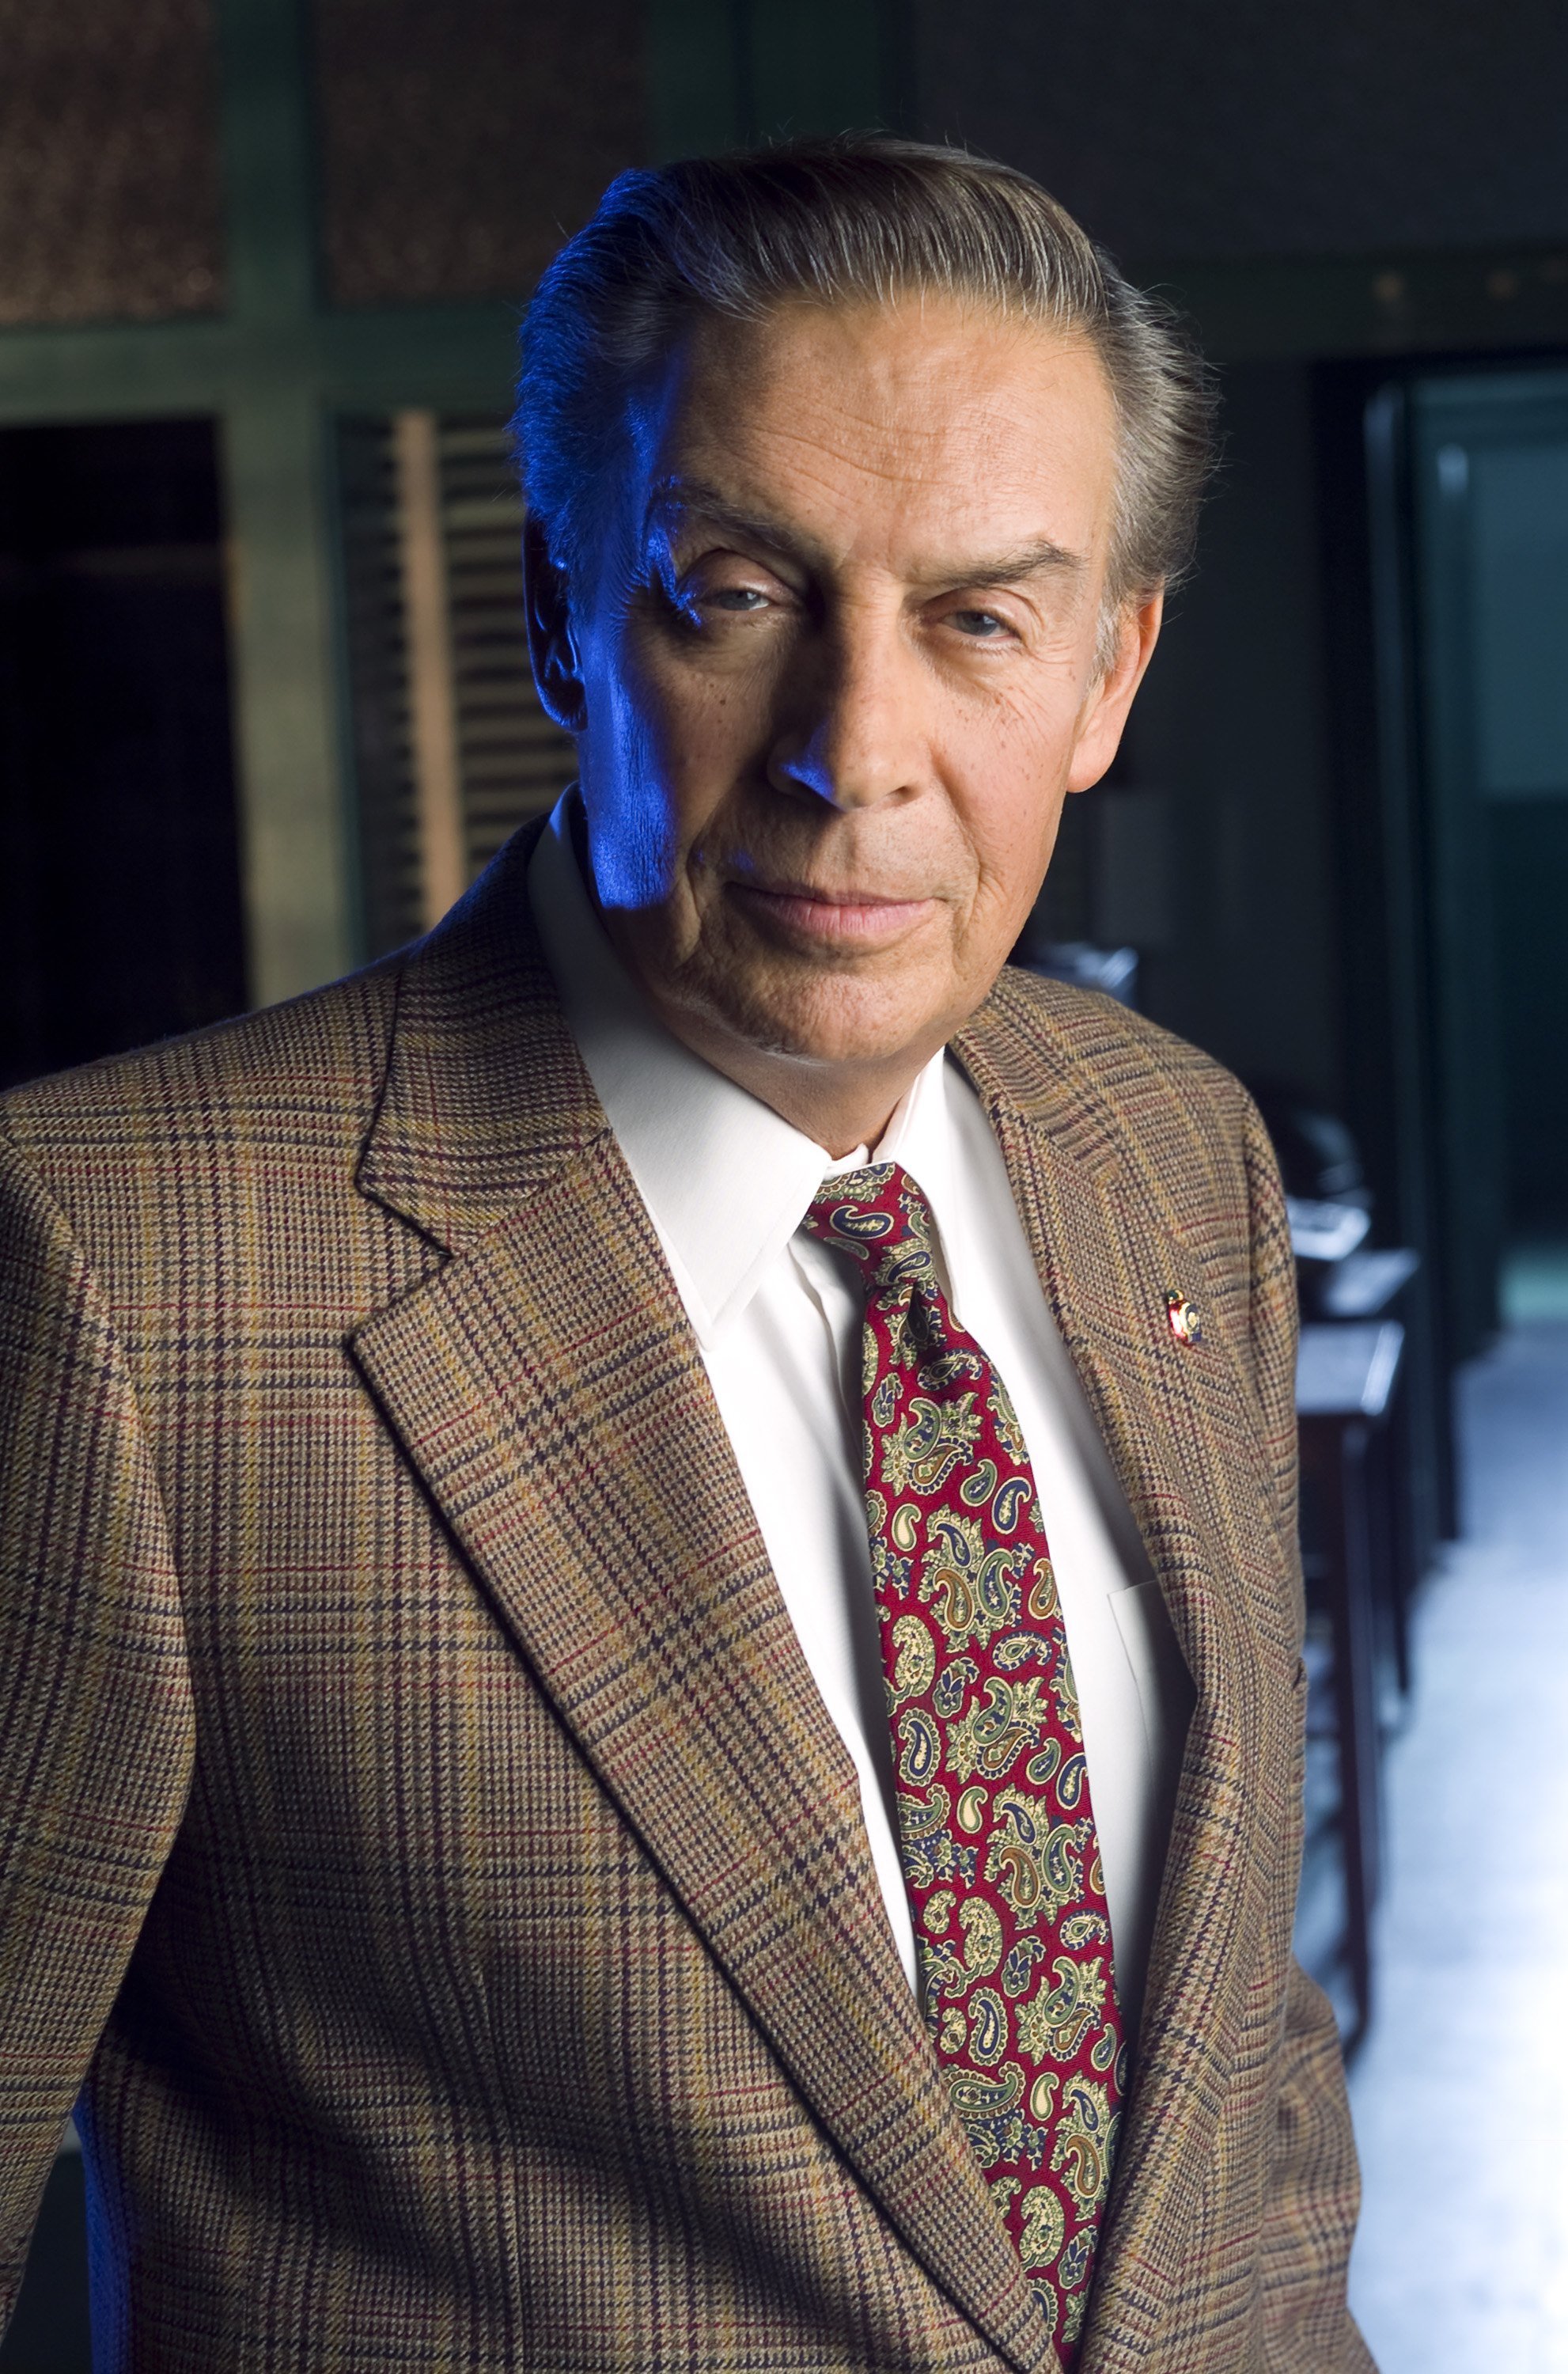 Jerry Orbach as Detective Lennie Briscoe on Season 11 of "Law & Order" | Source: Getty Images